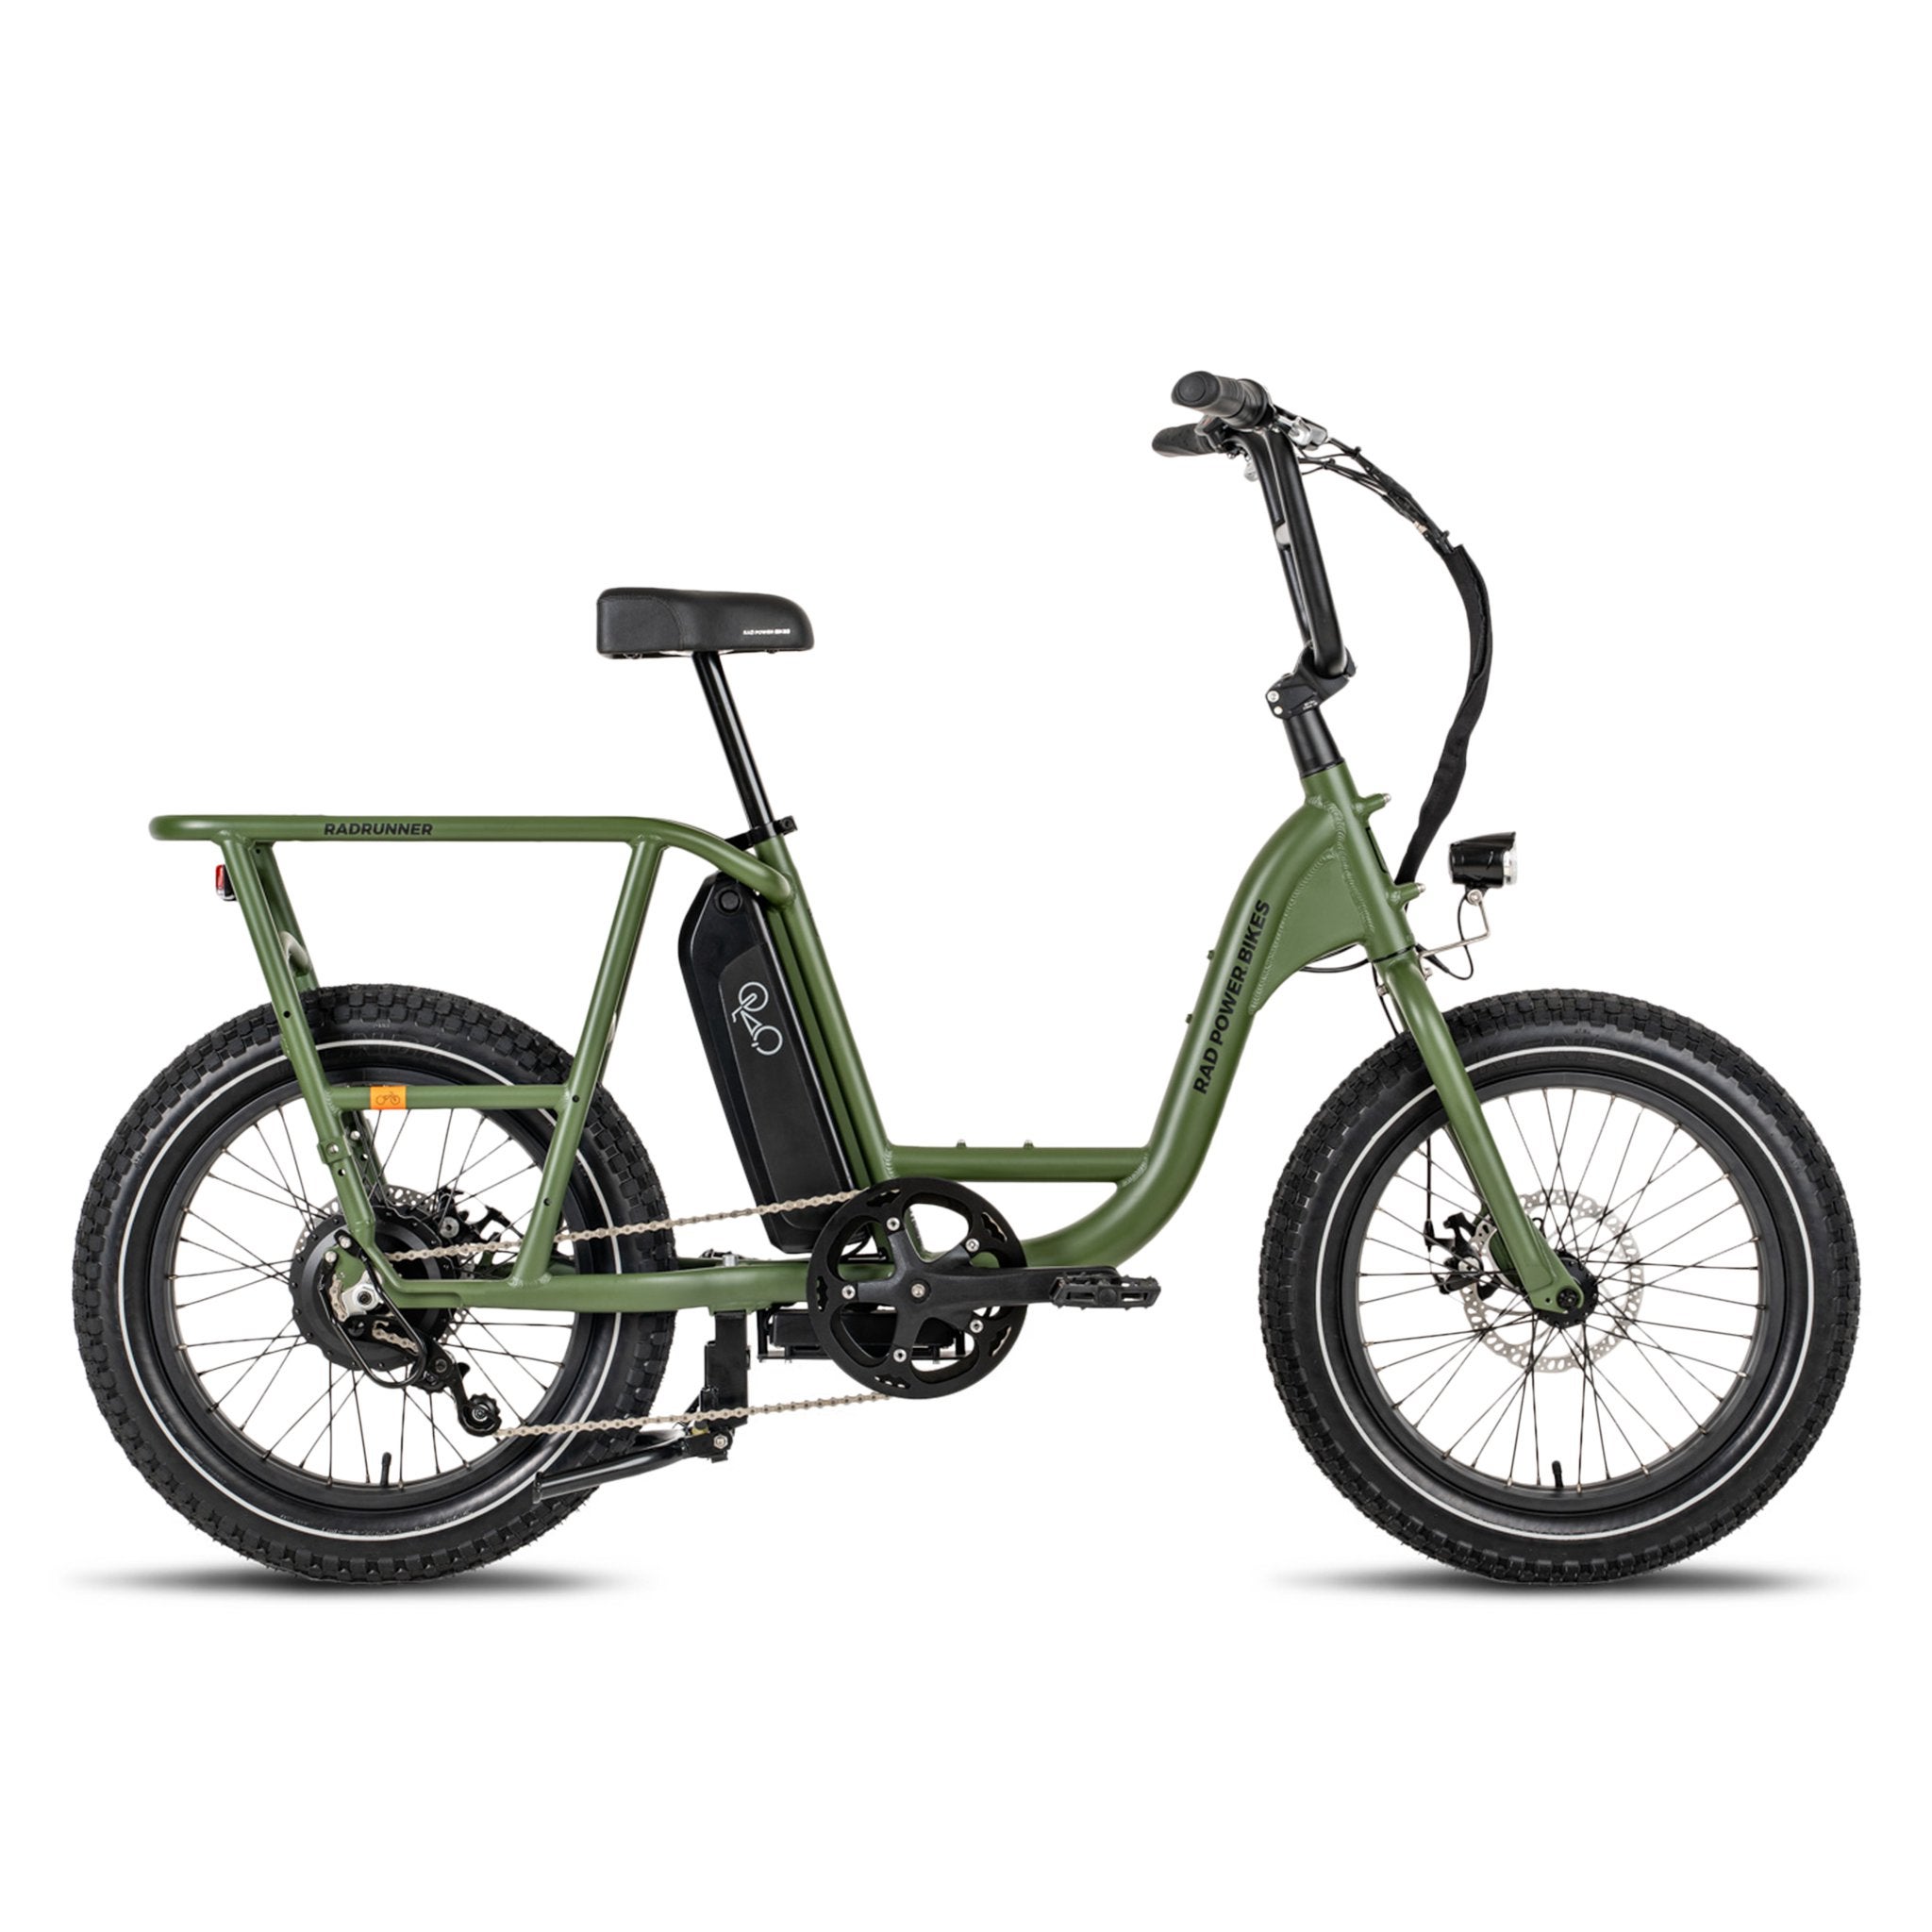 Radrunner 2 or Ride1Up Cafe Cruiser for commute/utility?